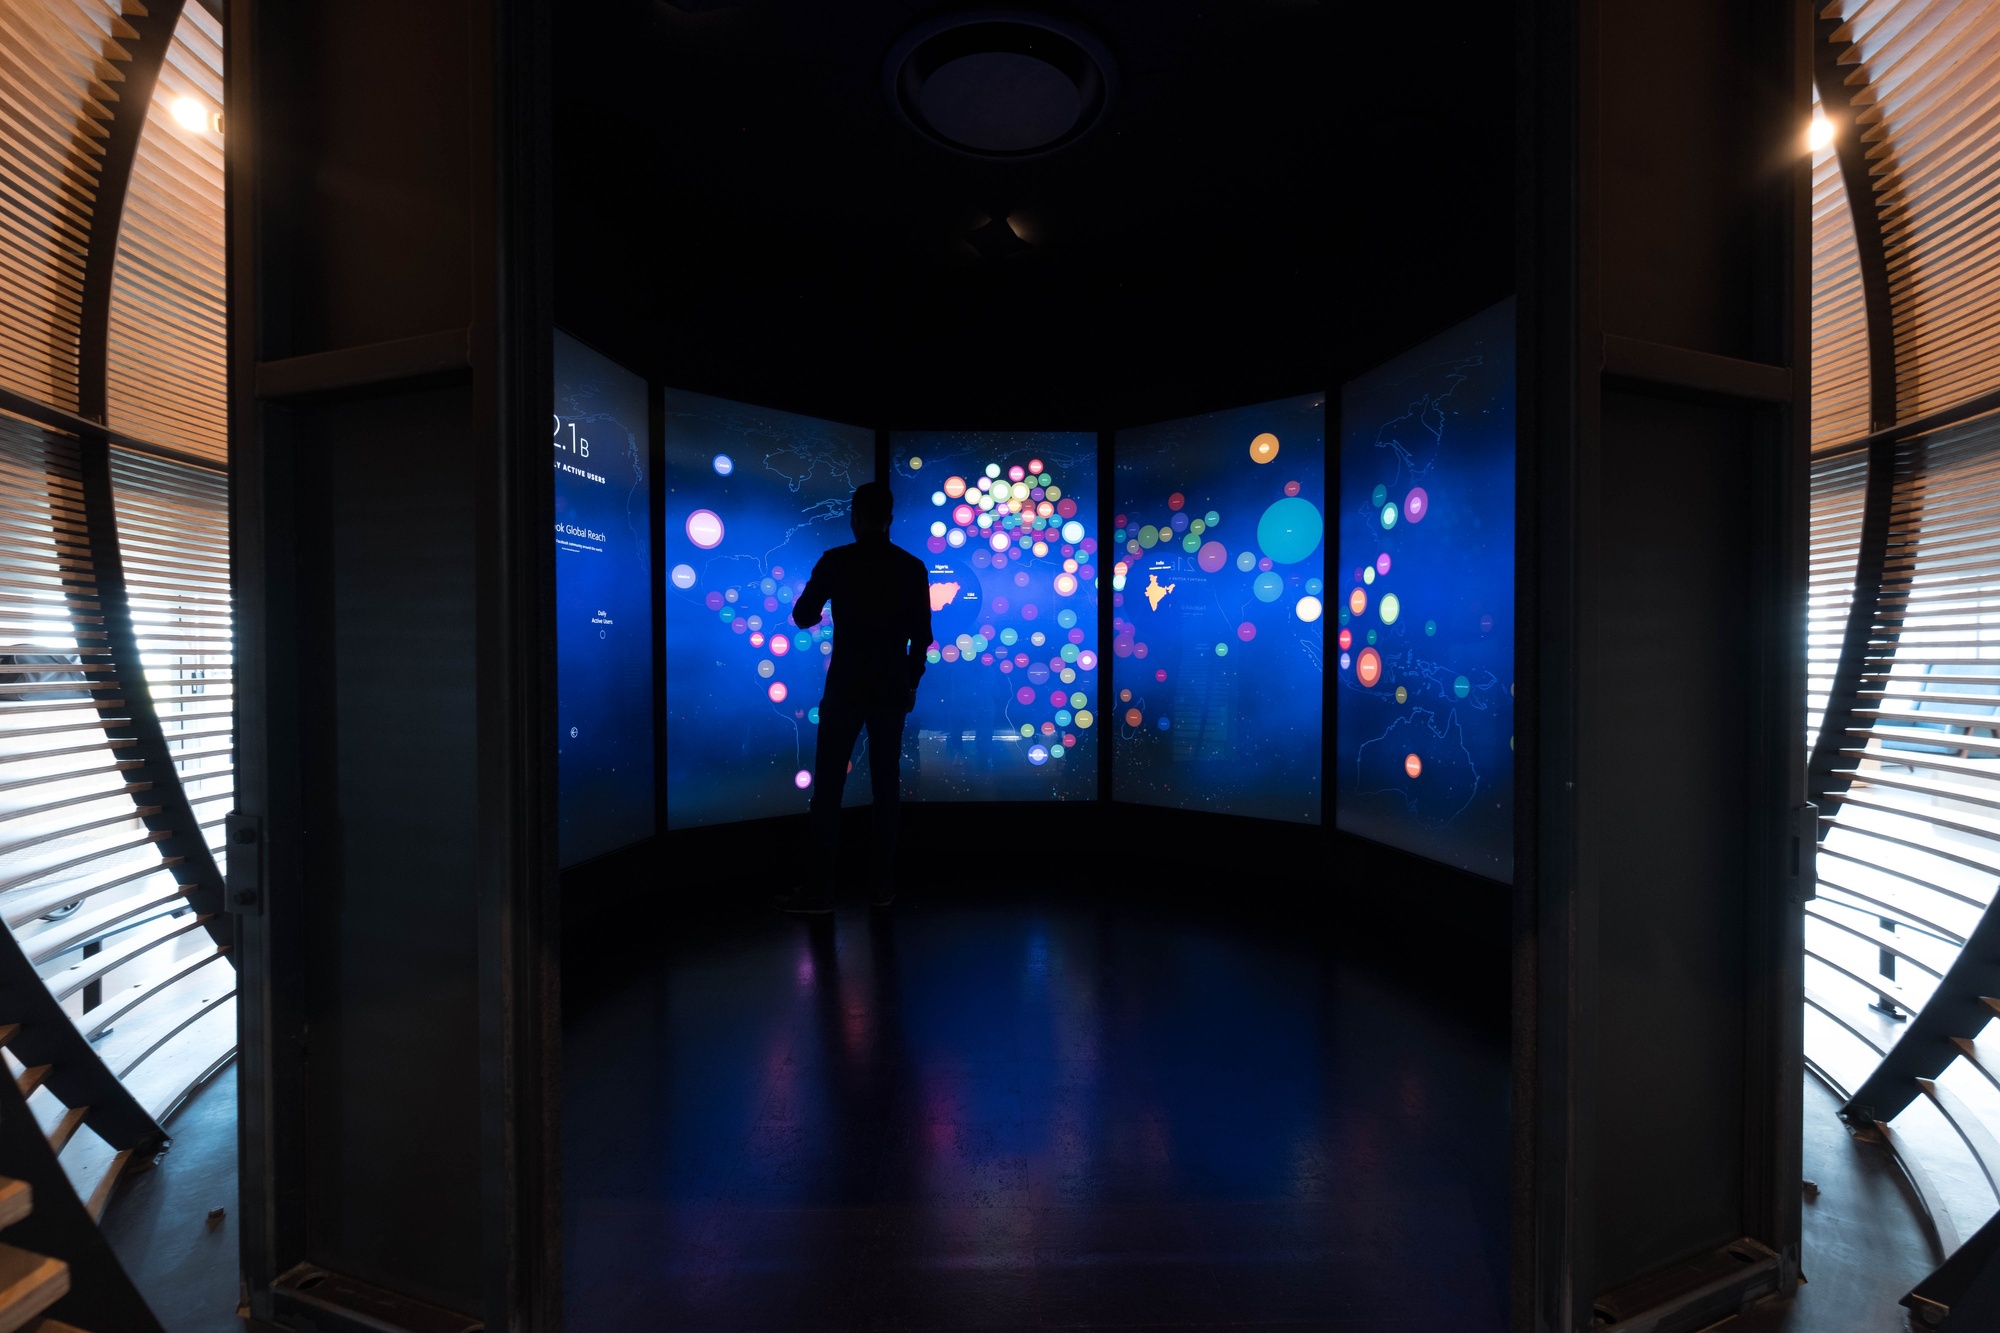 Image of domed installation, taken from the entrance, showing large screens that display data visualization on the inside